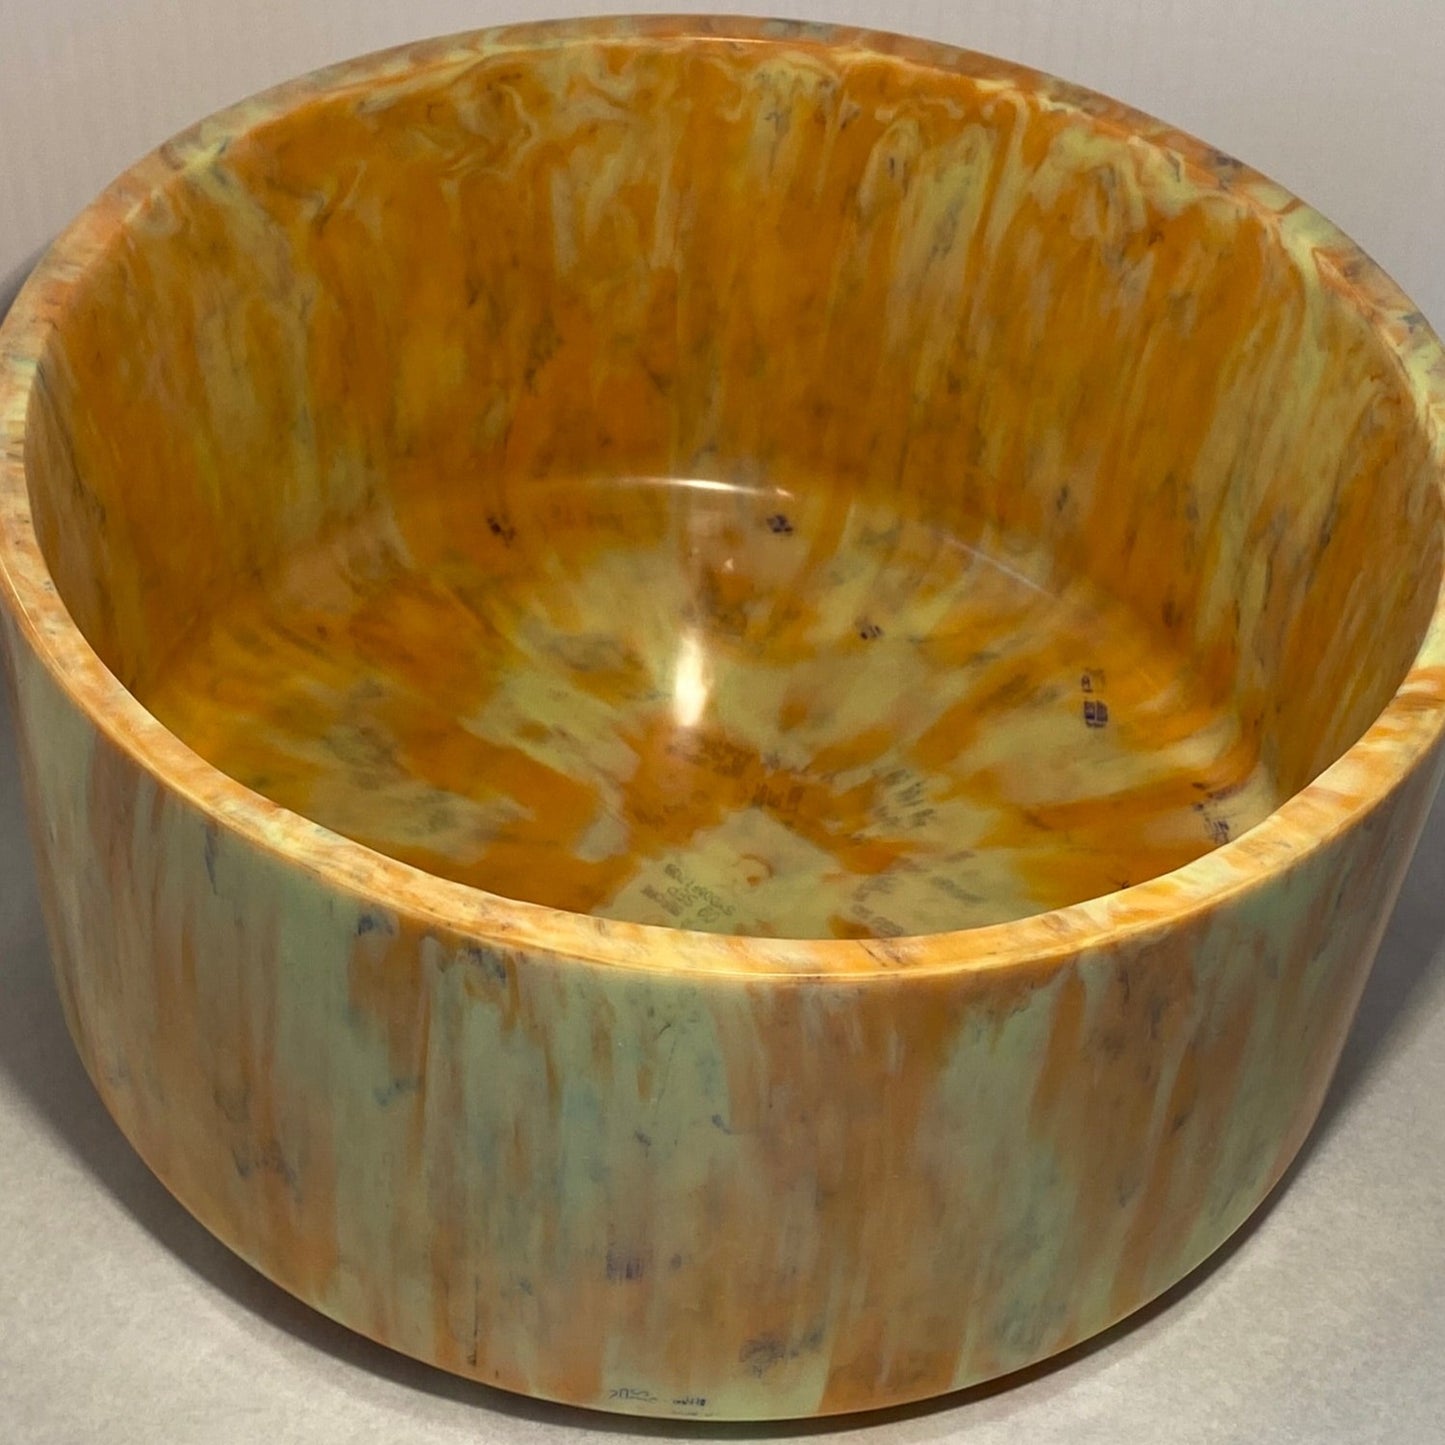 Large Round Bowl Made From Recycled Breadtags